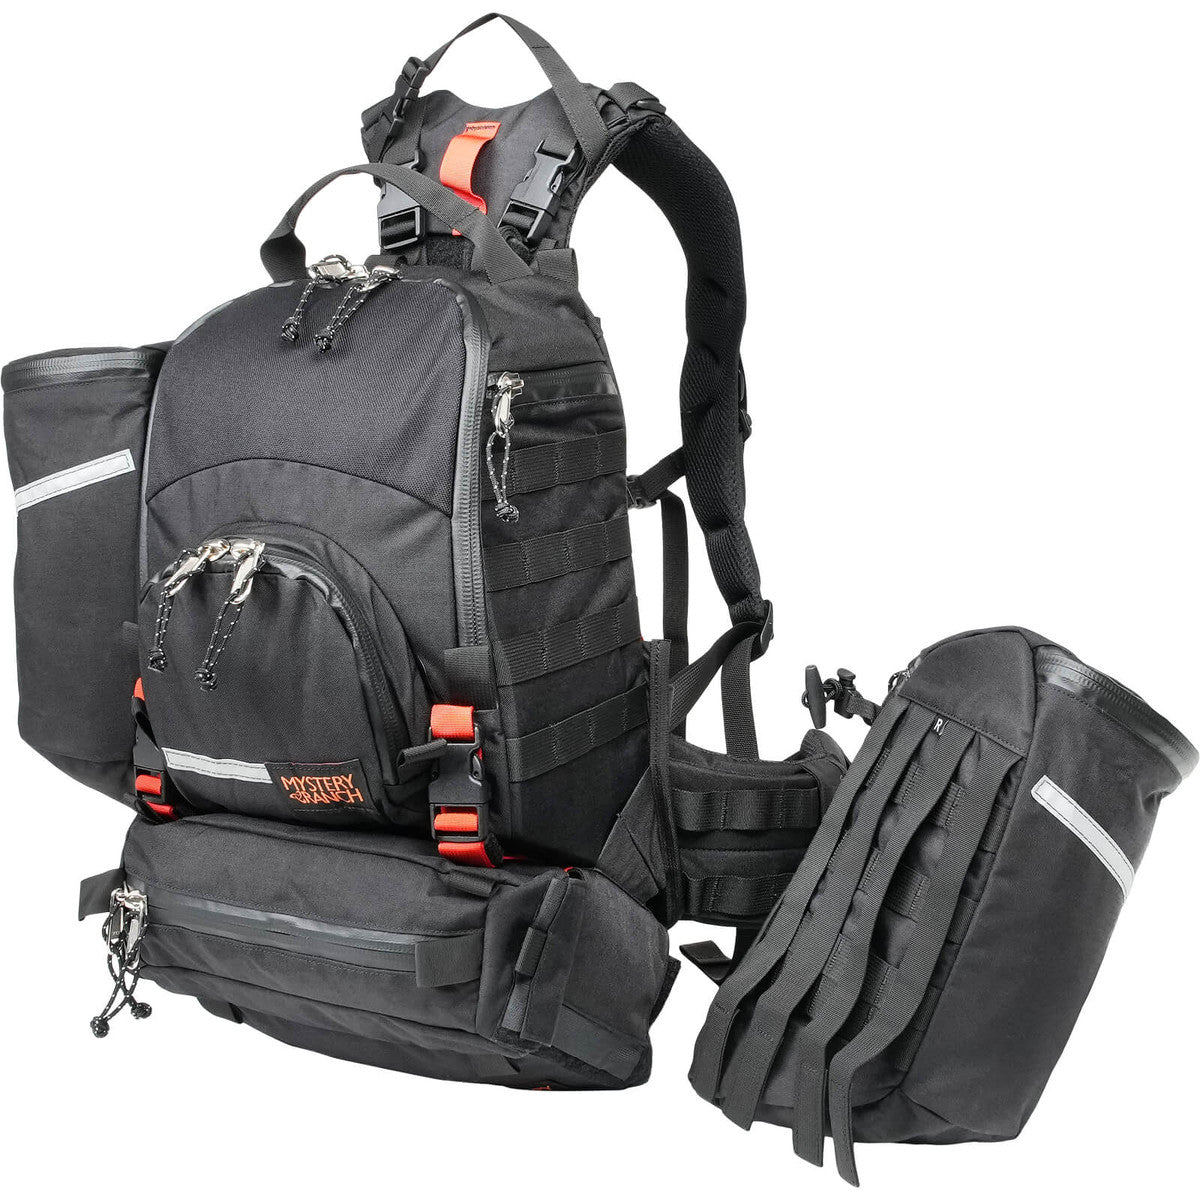 Shift 900 MWP Pack, Mystery Ranch